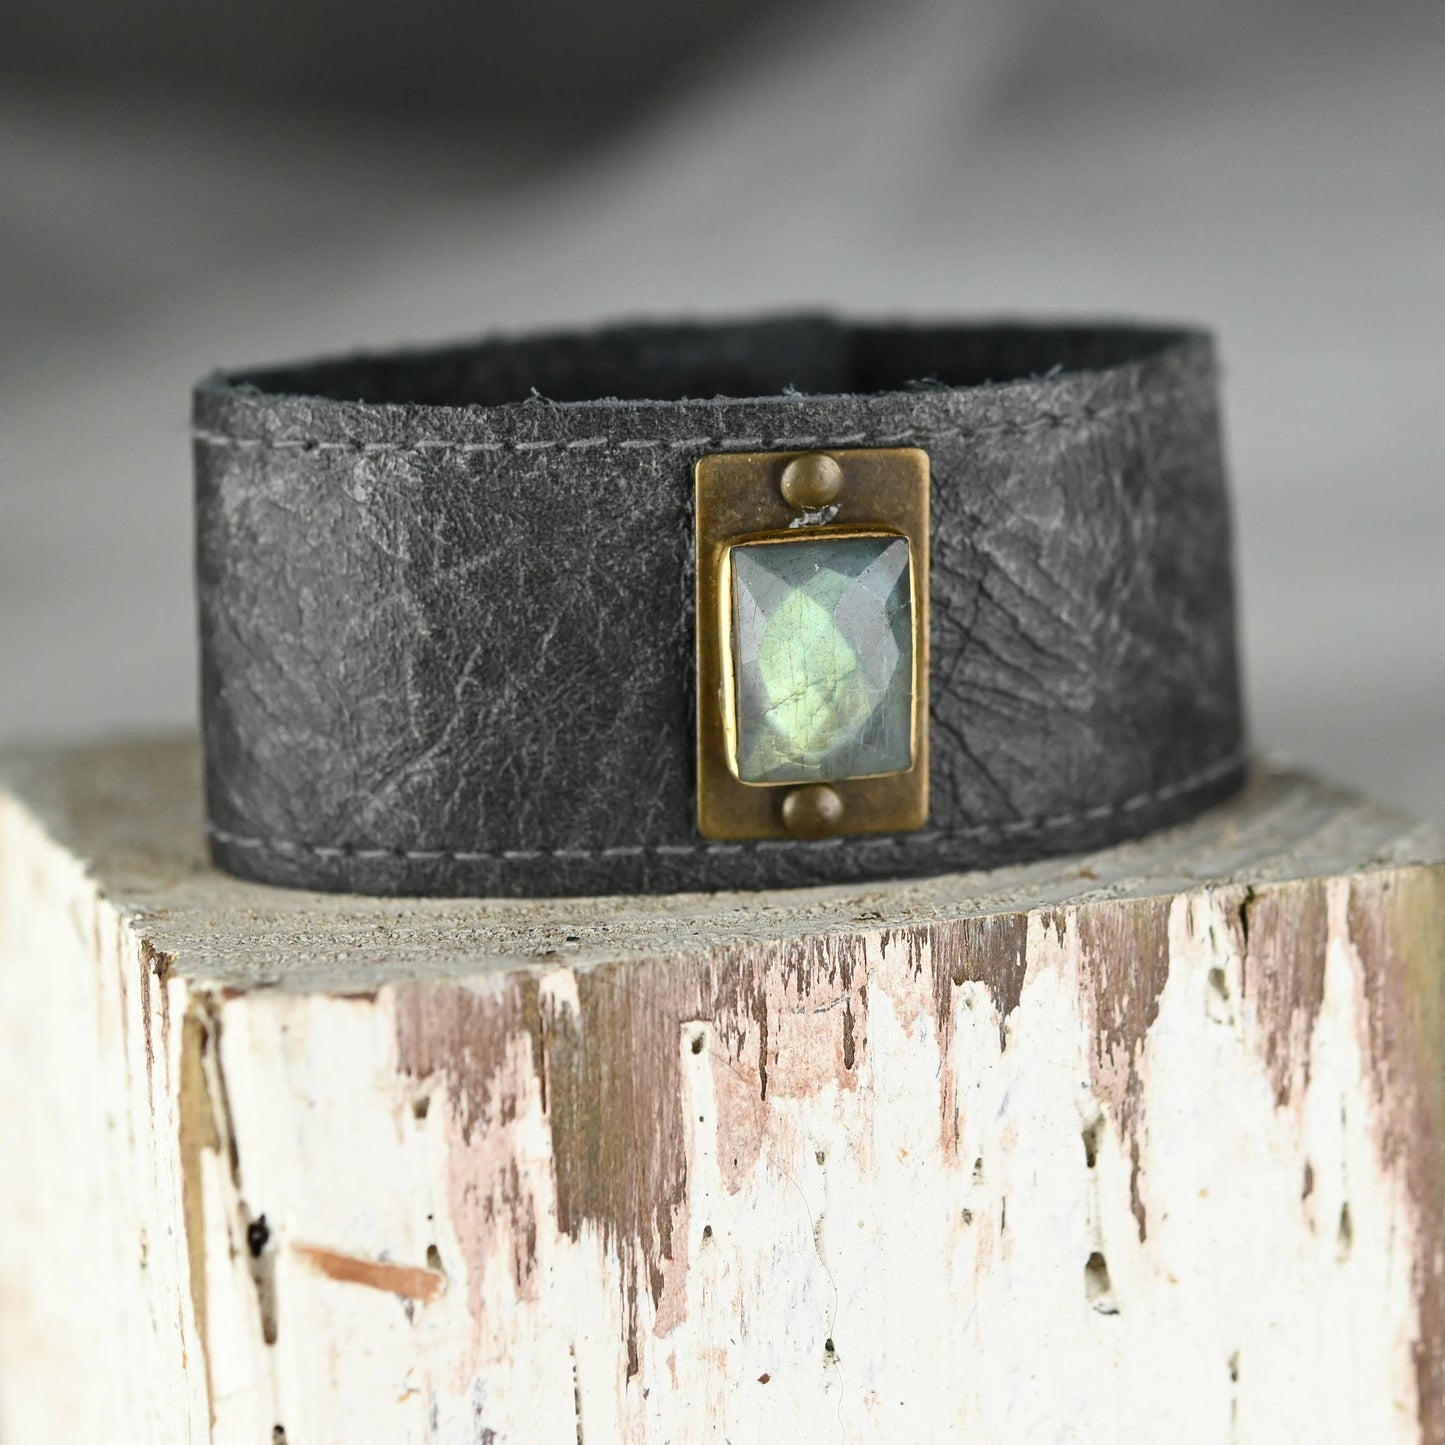 Midsize Cuff with Labradorite on Charcoal Distressed Leather